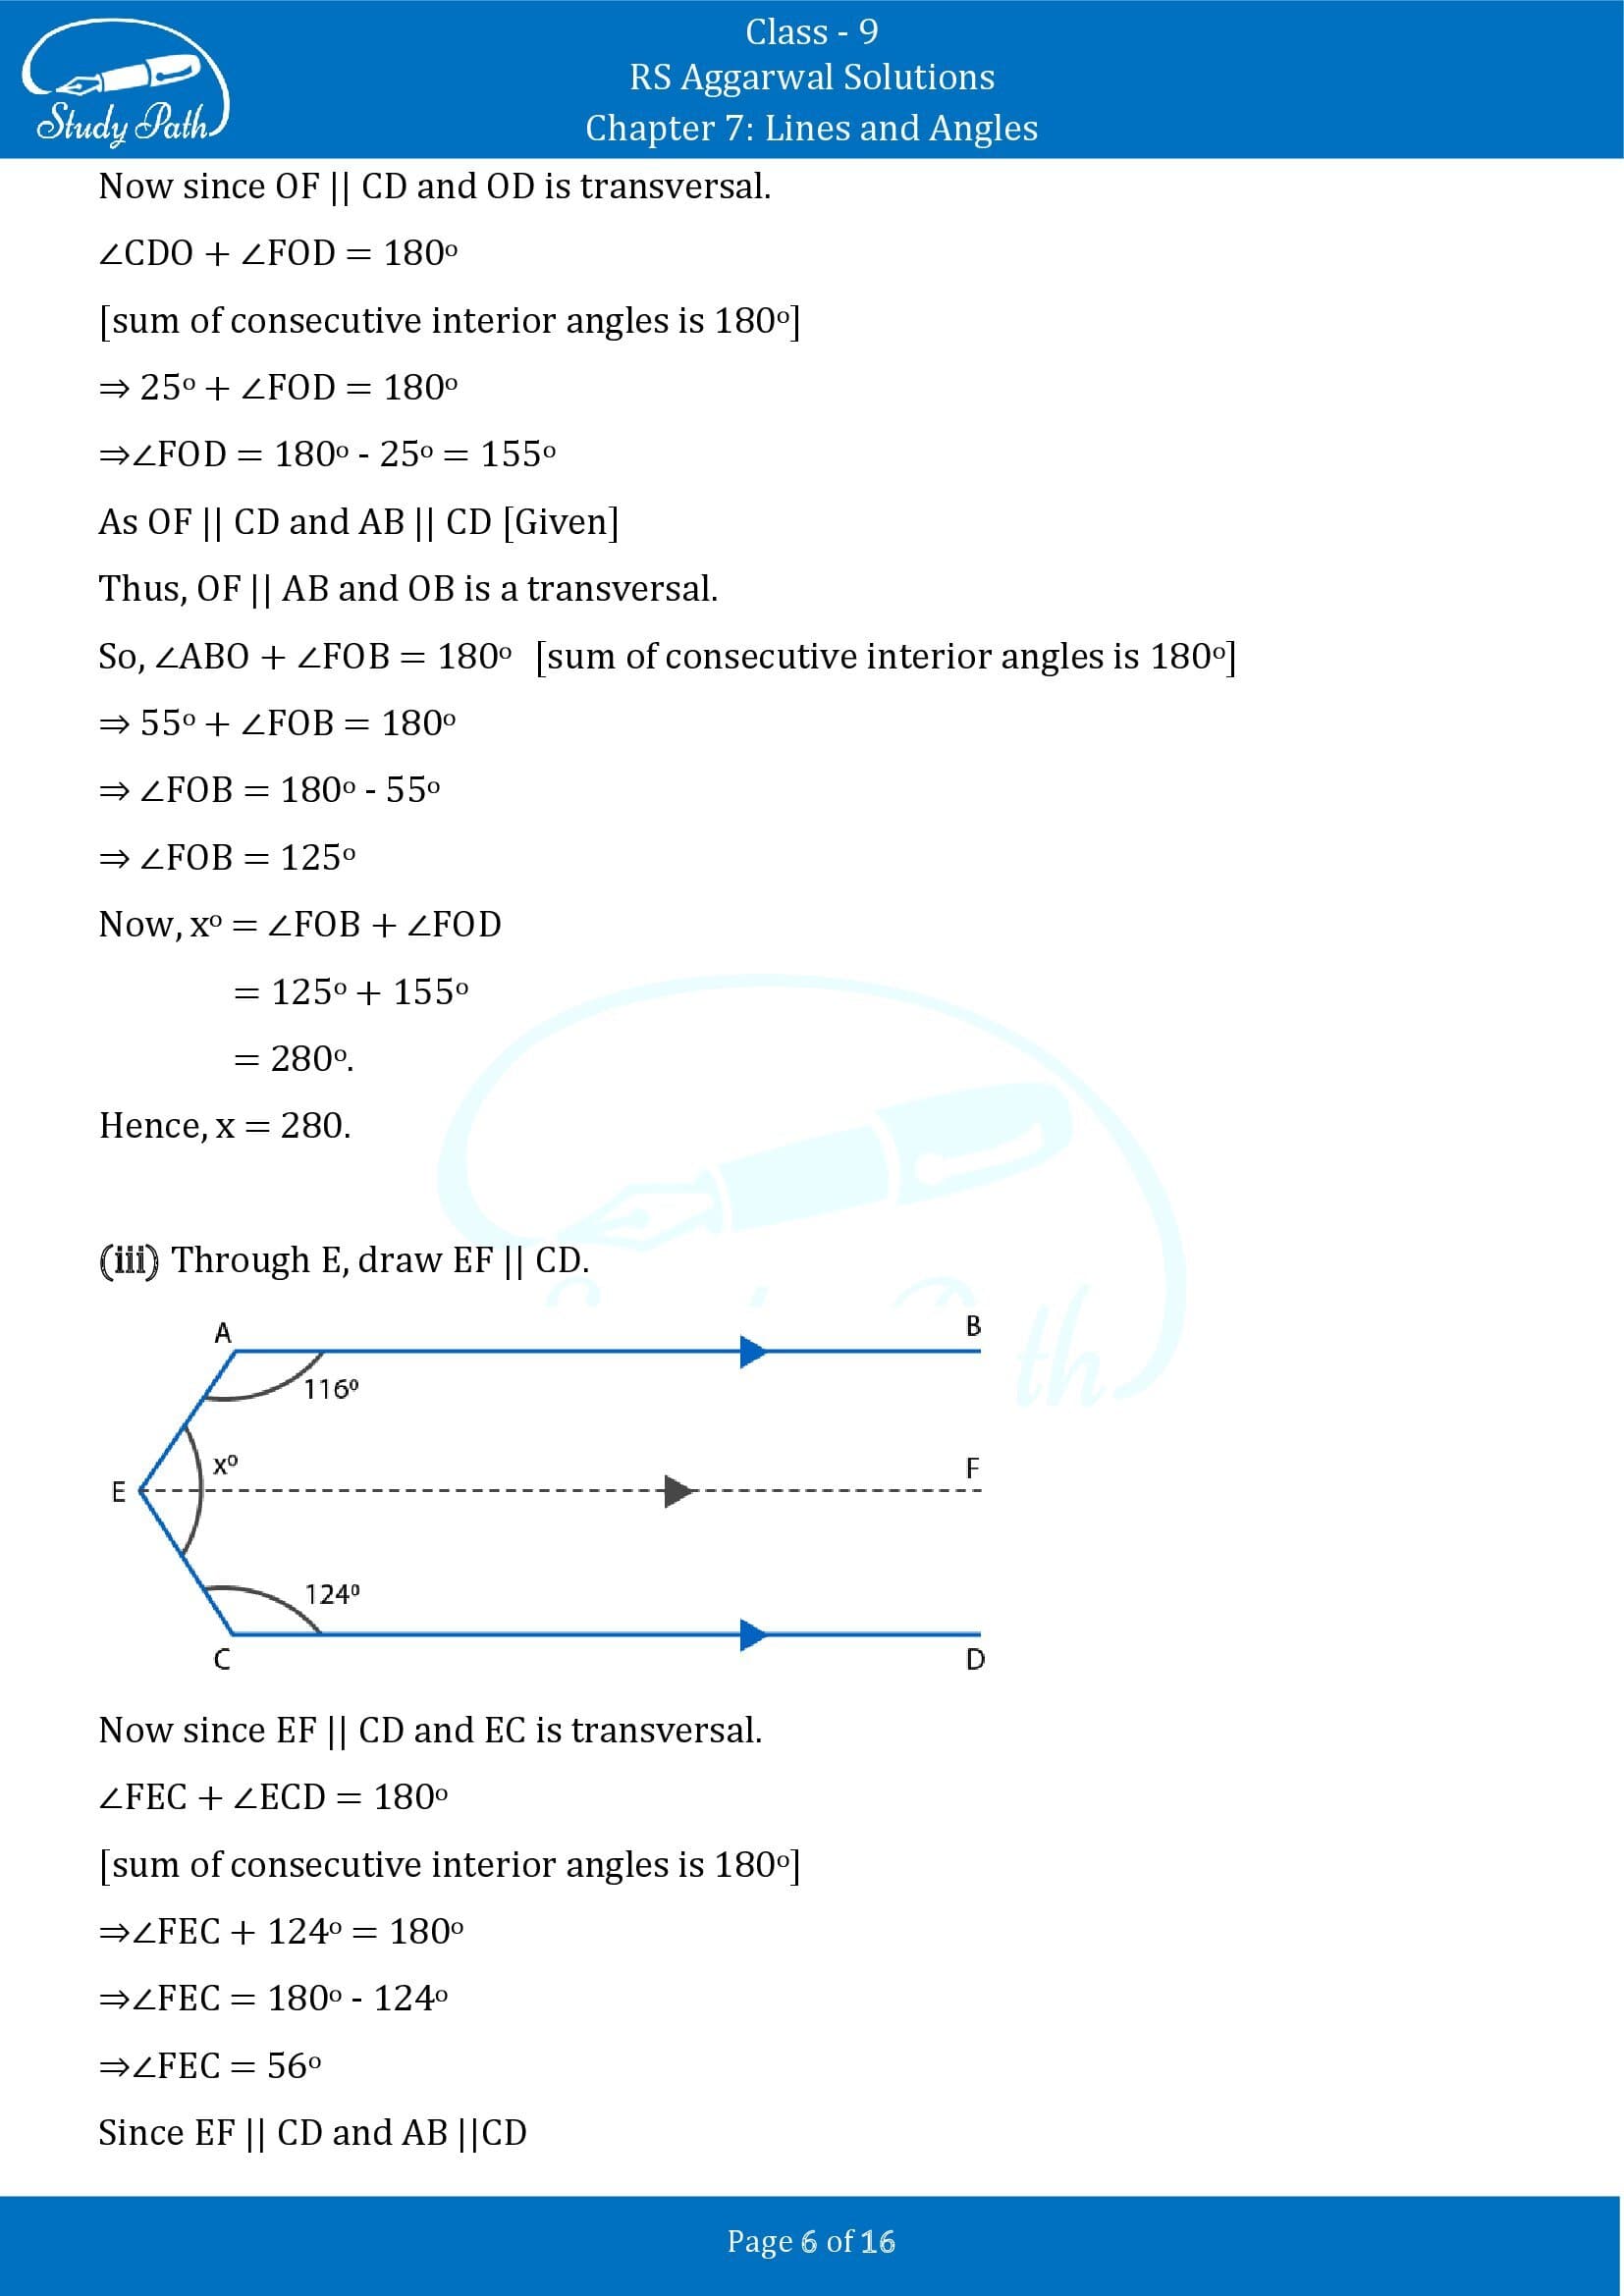 RS Aggarwal Solutions Class 9 Chapter 7 Lines and Angles Exercise 7C 00006